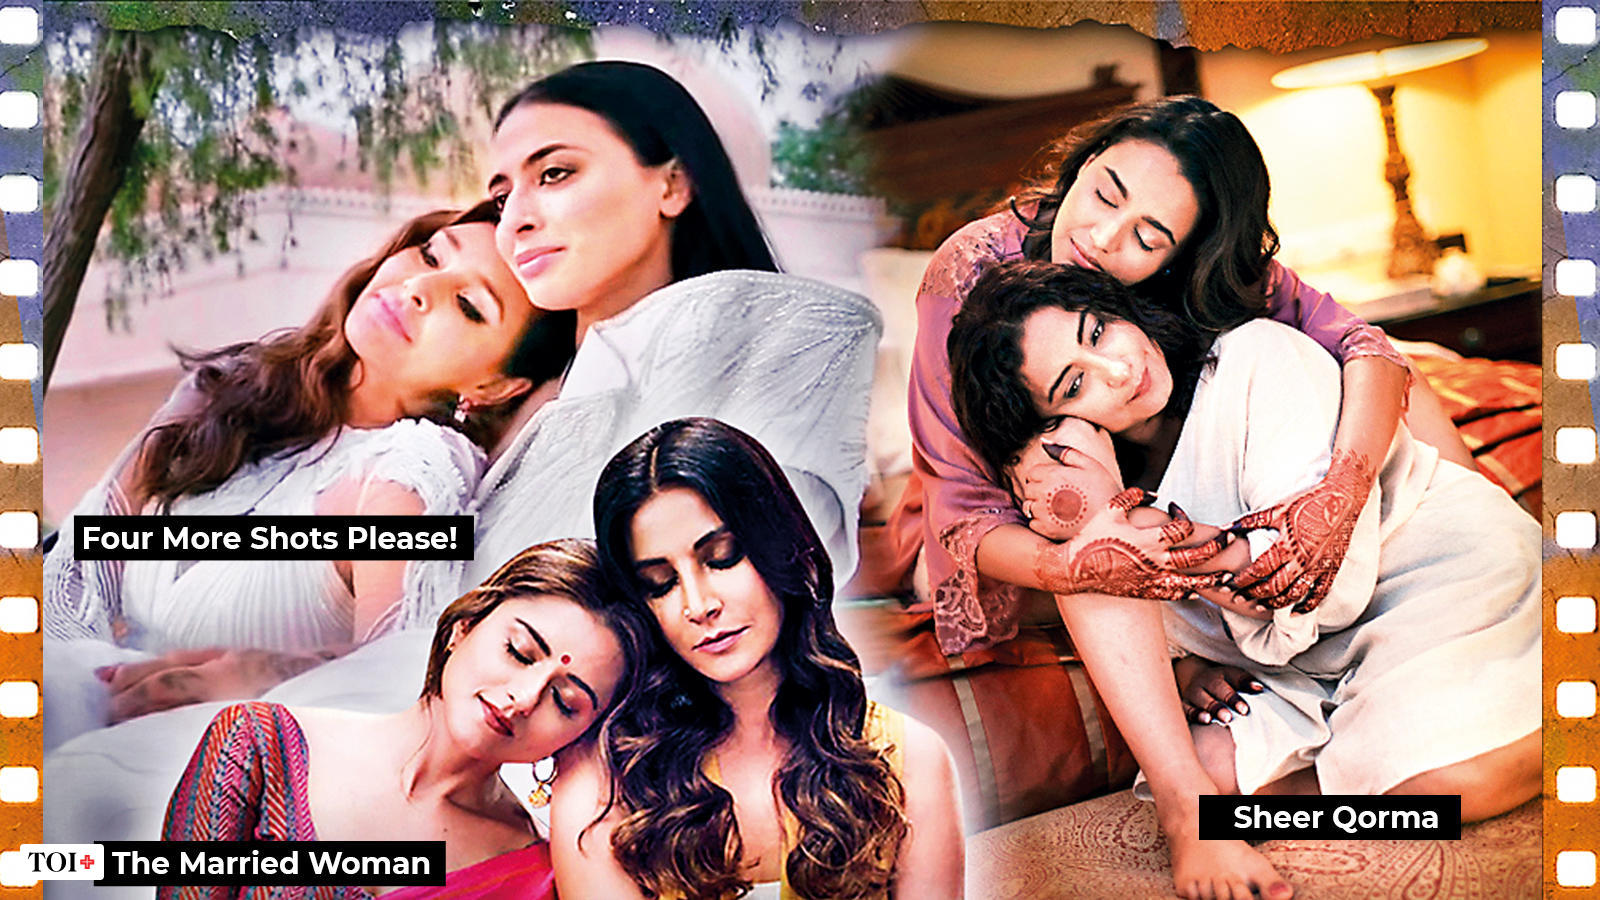 Lesbian love stories are blossoming on screen India News pic